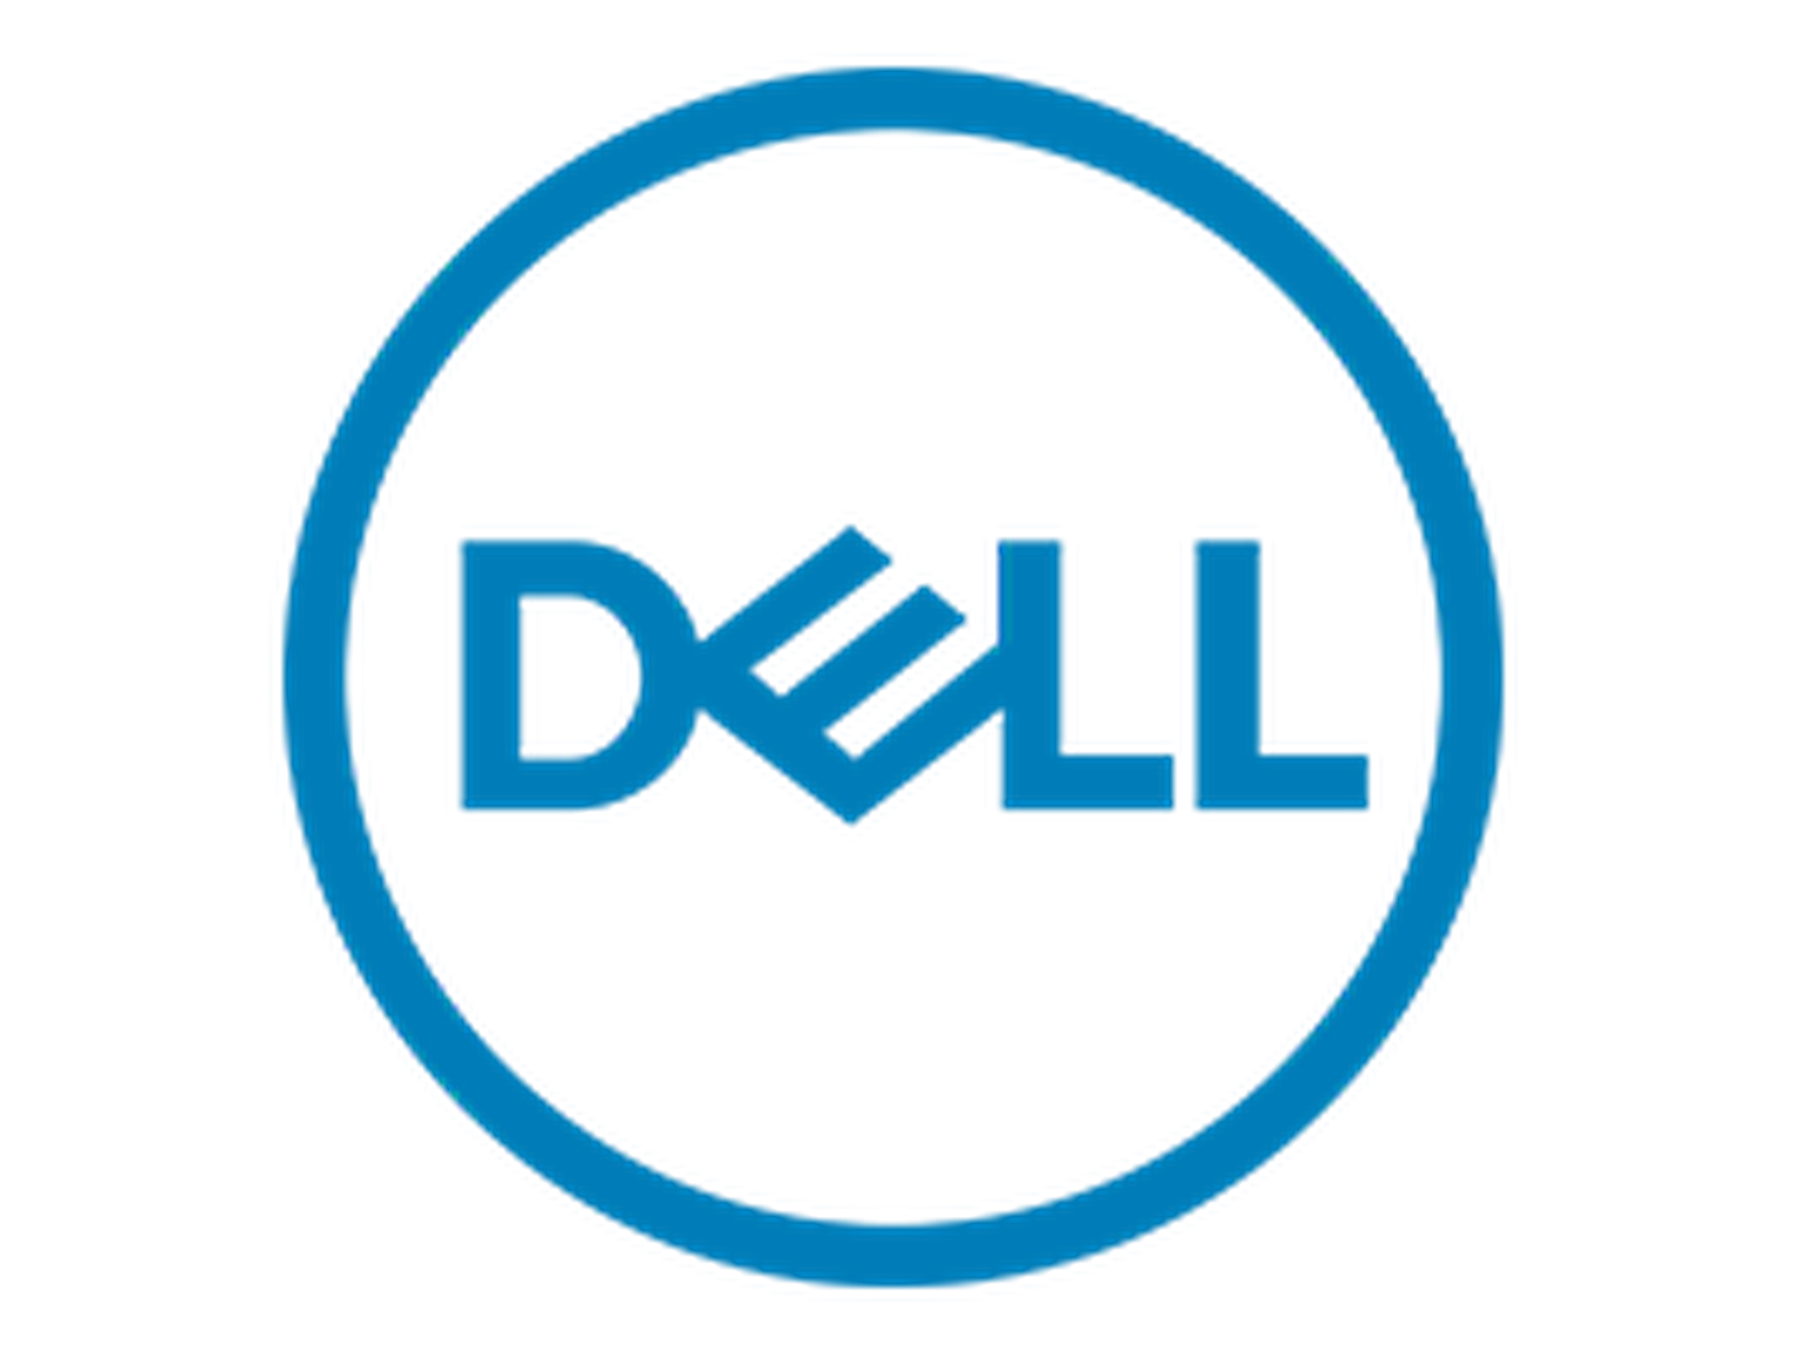 Dell Coupon